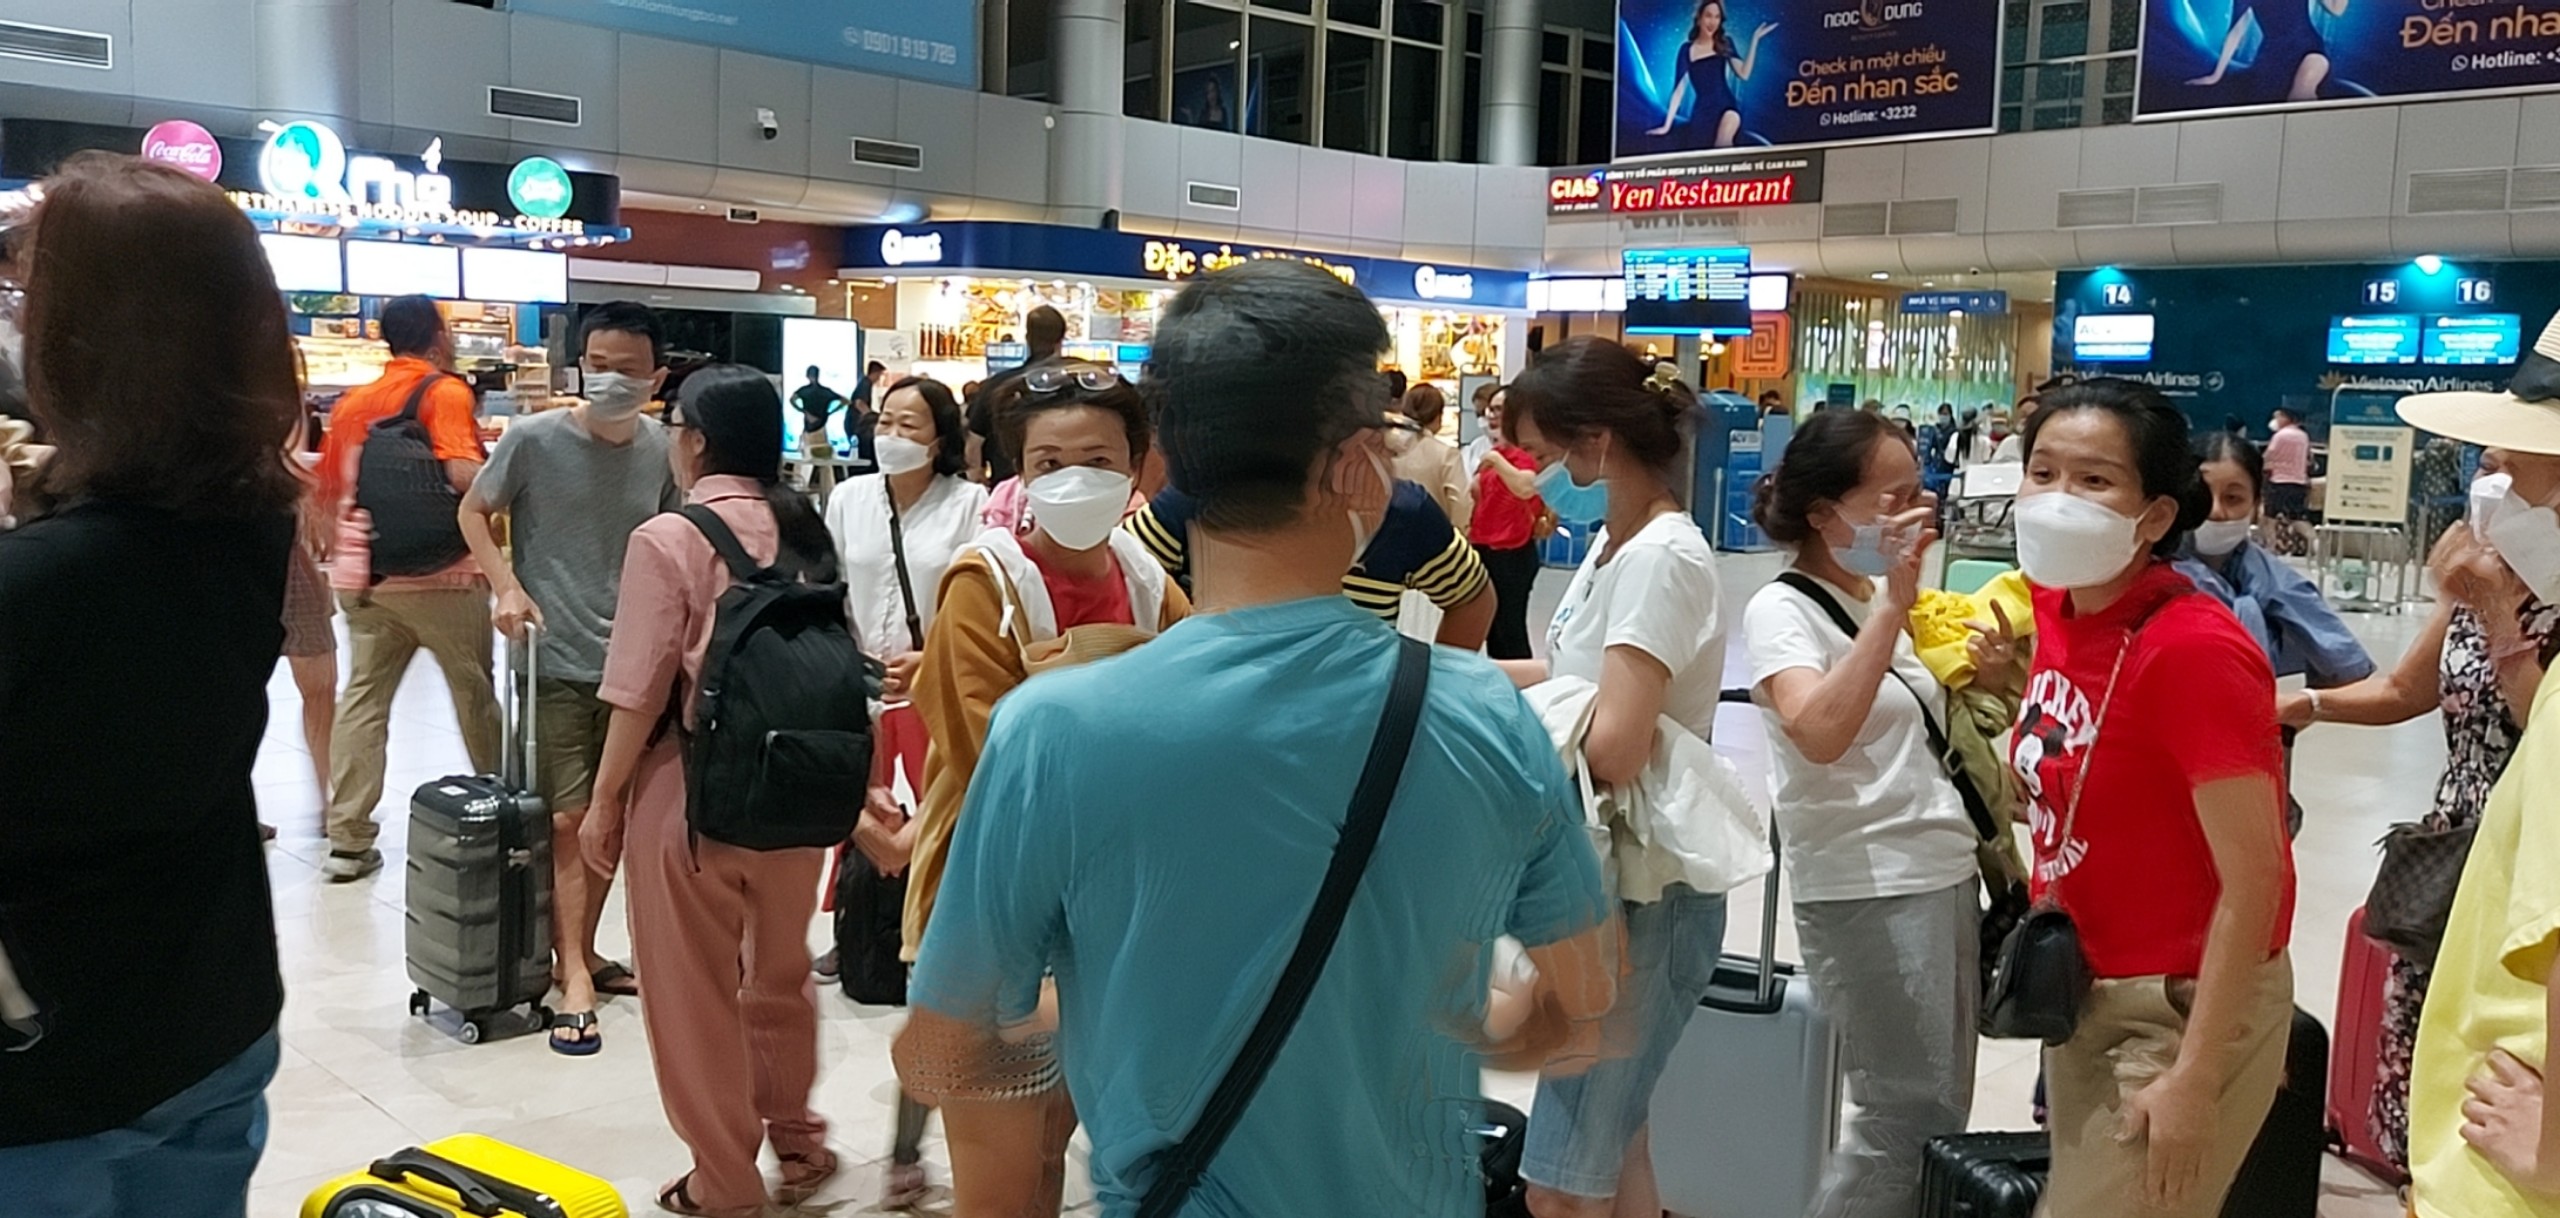 Passengers wait as their Pacific Airlines flight to Ho Chi Minh City is delayed at Cam Ranh Airport in Khanh Hoa Province, Vietnam, April 17, 2022. Photo: Minh Nhat / Tuoi Tre